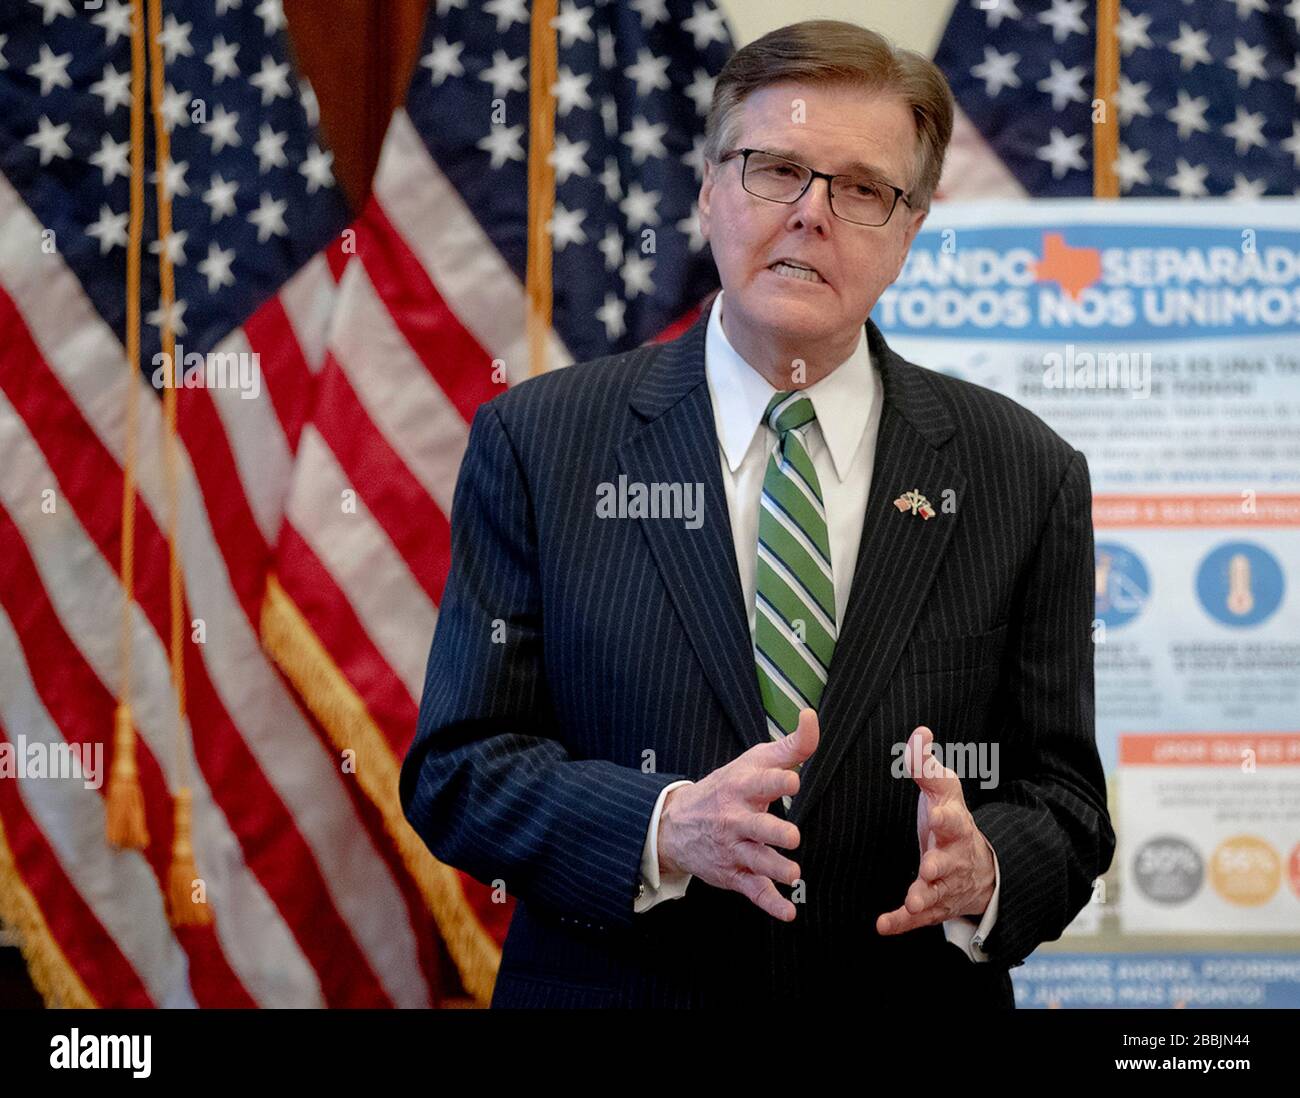 Austin, Texas, USA. 31st Mar, 2020. Texas Lt. Gov. Dan Patrick speaks during a press conference at the state Capitol about the state's response to the coronavirus. Credit: Nick Wagner/AAS/POOL/ZUMA Wire/Alamy Live News Stock Photo